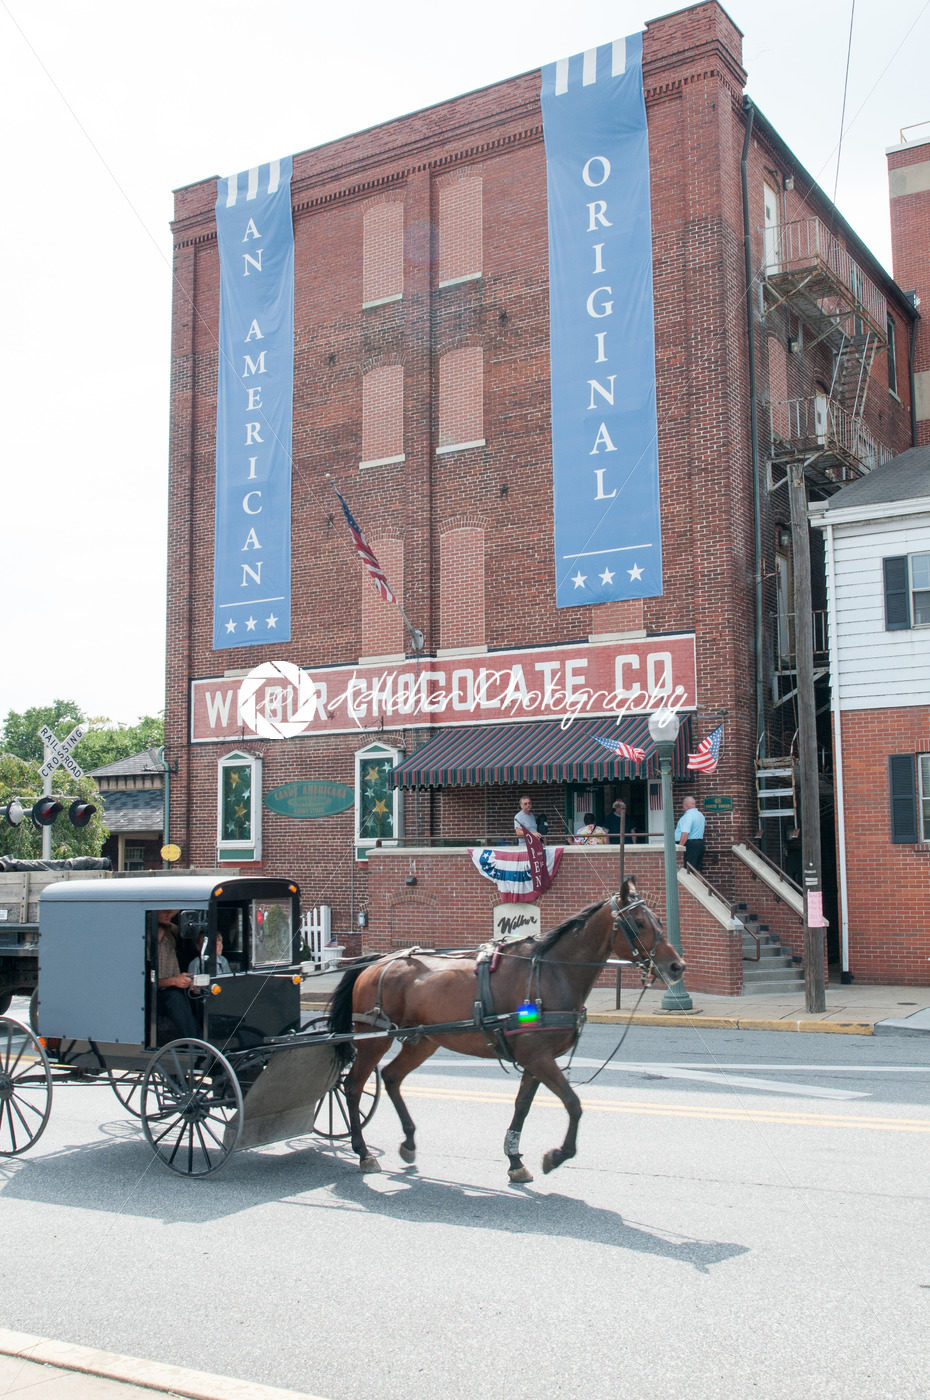 LITITZ, PA – AUGUST 30: Amish horse and buggy riding past the famed Wilbur Chocolate Company headquarters on Route 501 in Lititz on August 30, 2014 - Kelleher Photography Store